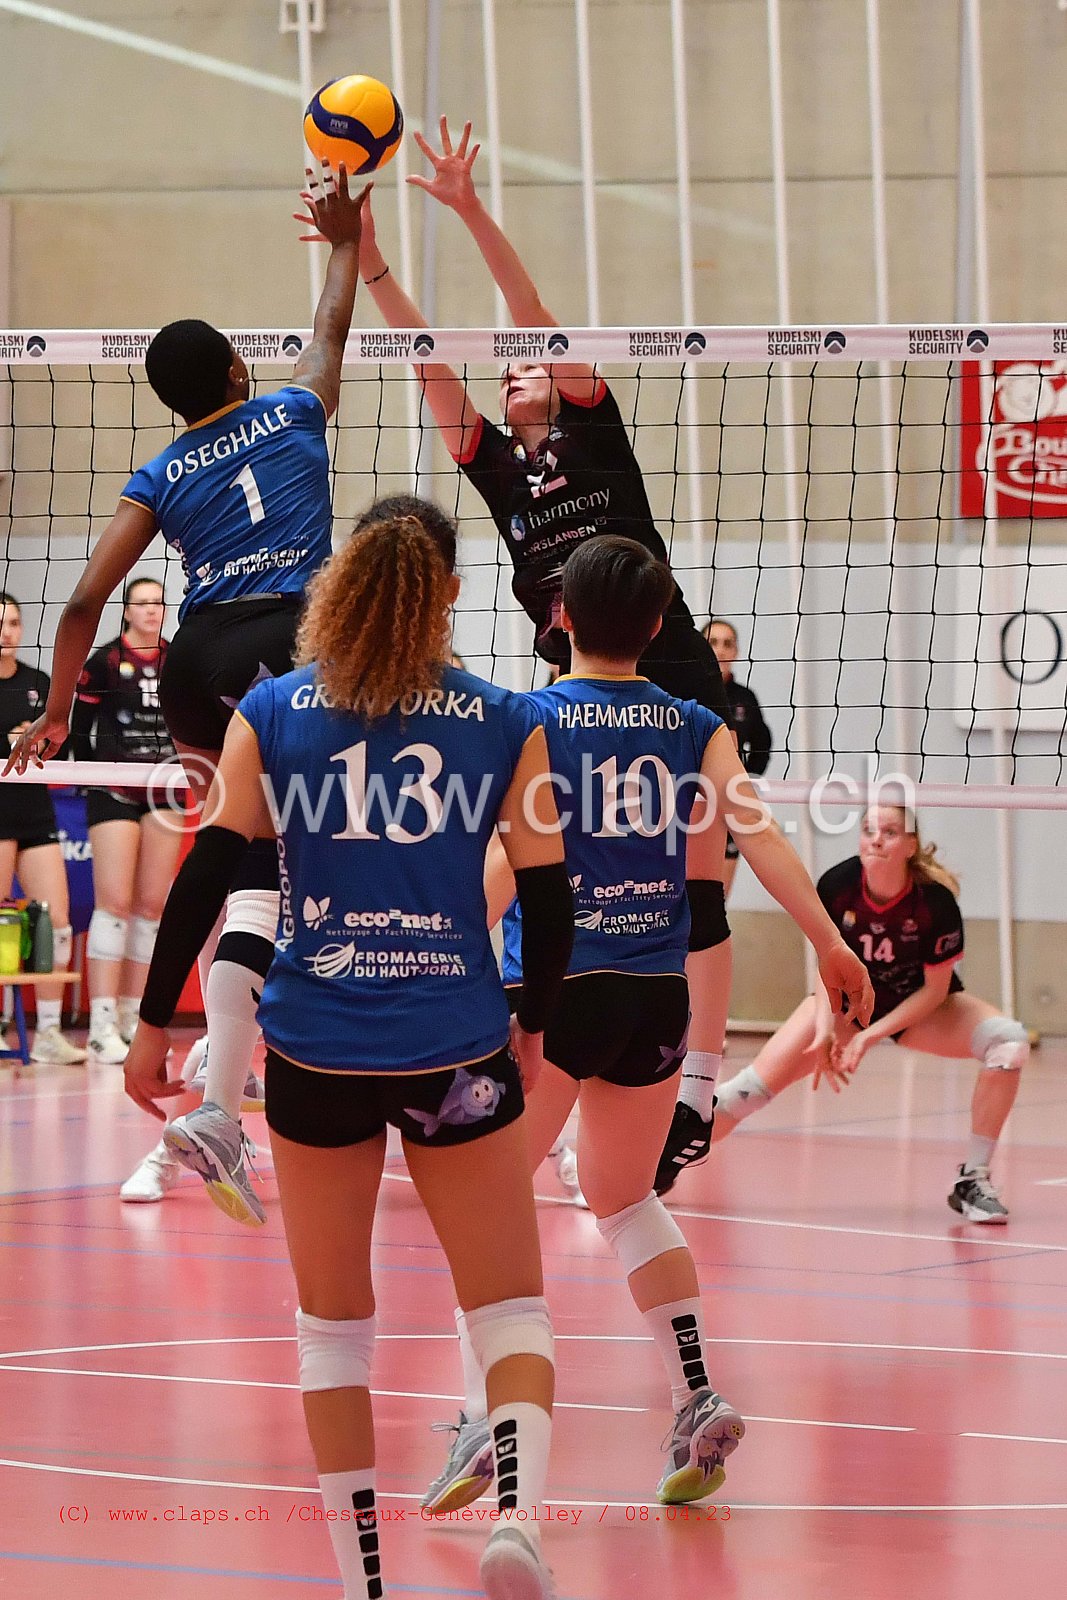 20230408_Cheseaux_GeneveVolley